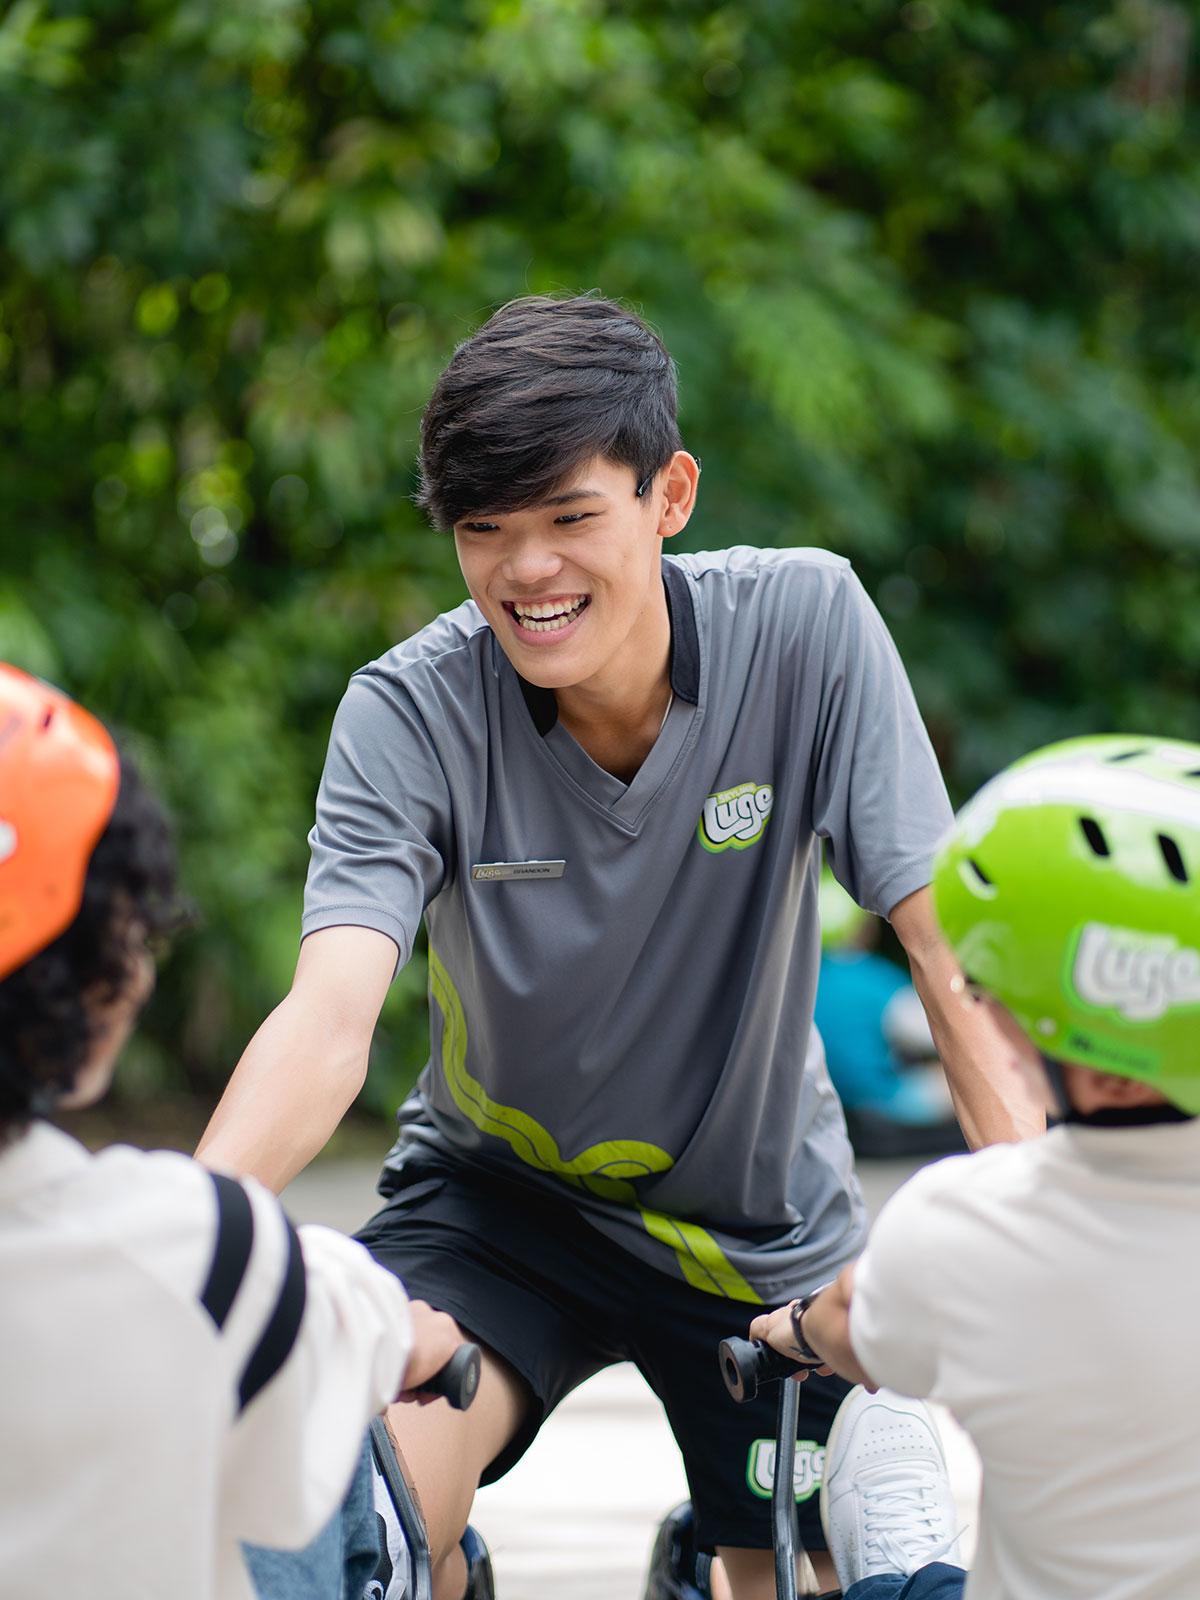 An Operations Host at Skyline Luge Singapore helping riders with their Luge Carts